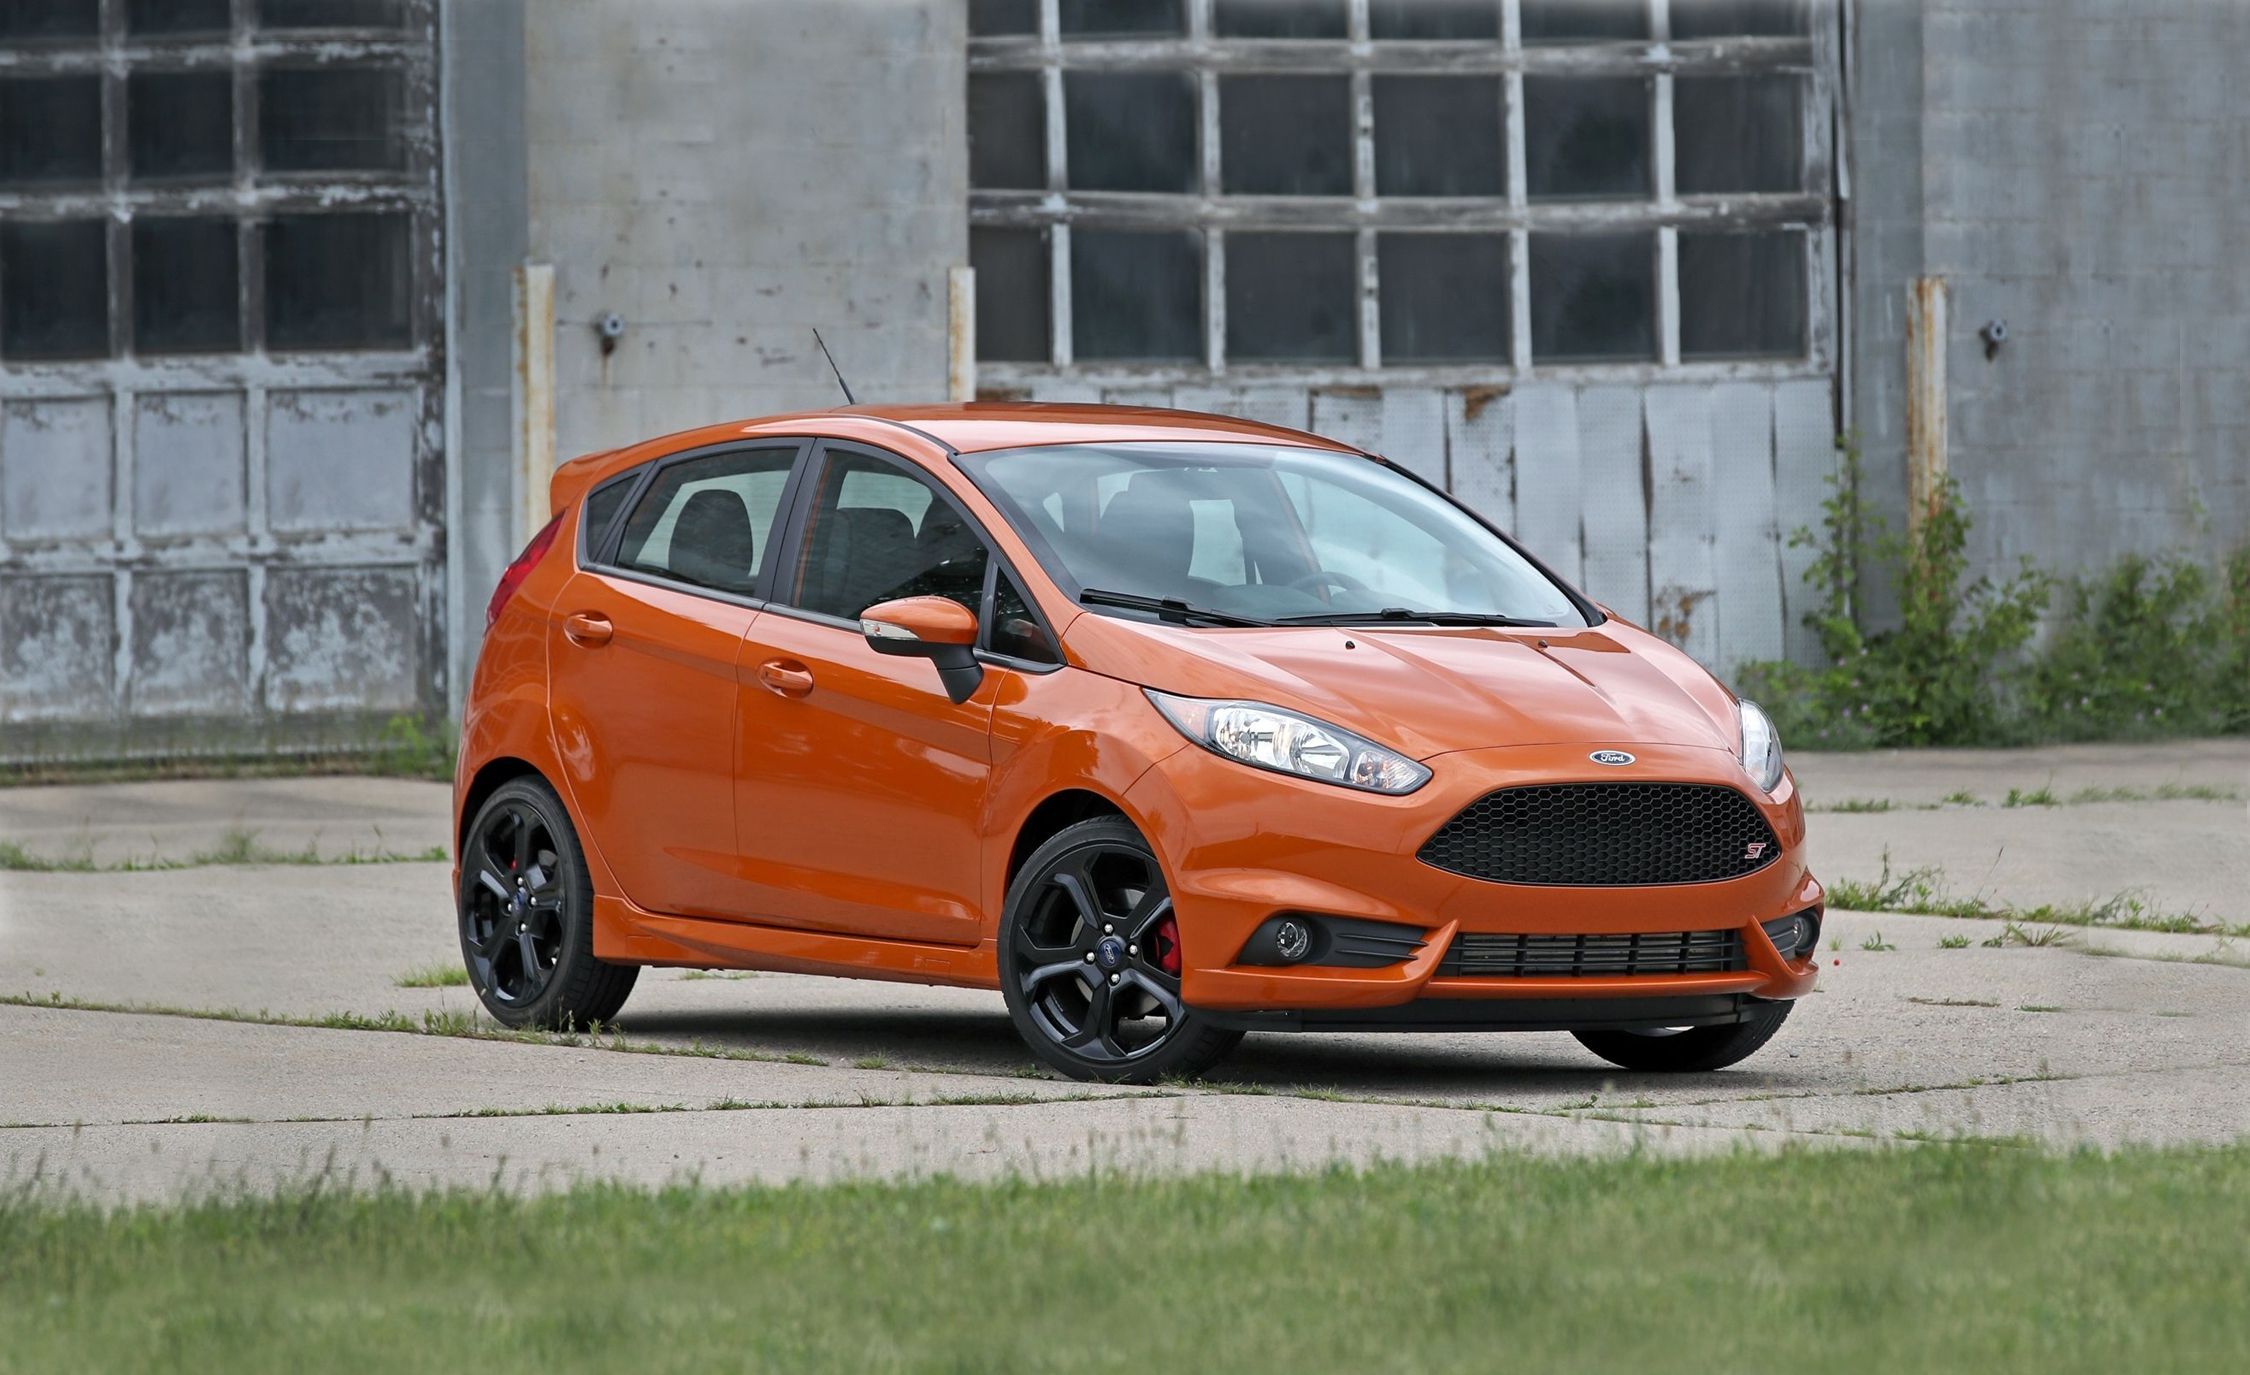 Ford Fiesta [MK7] (2017 - 2020) used car review, Car review